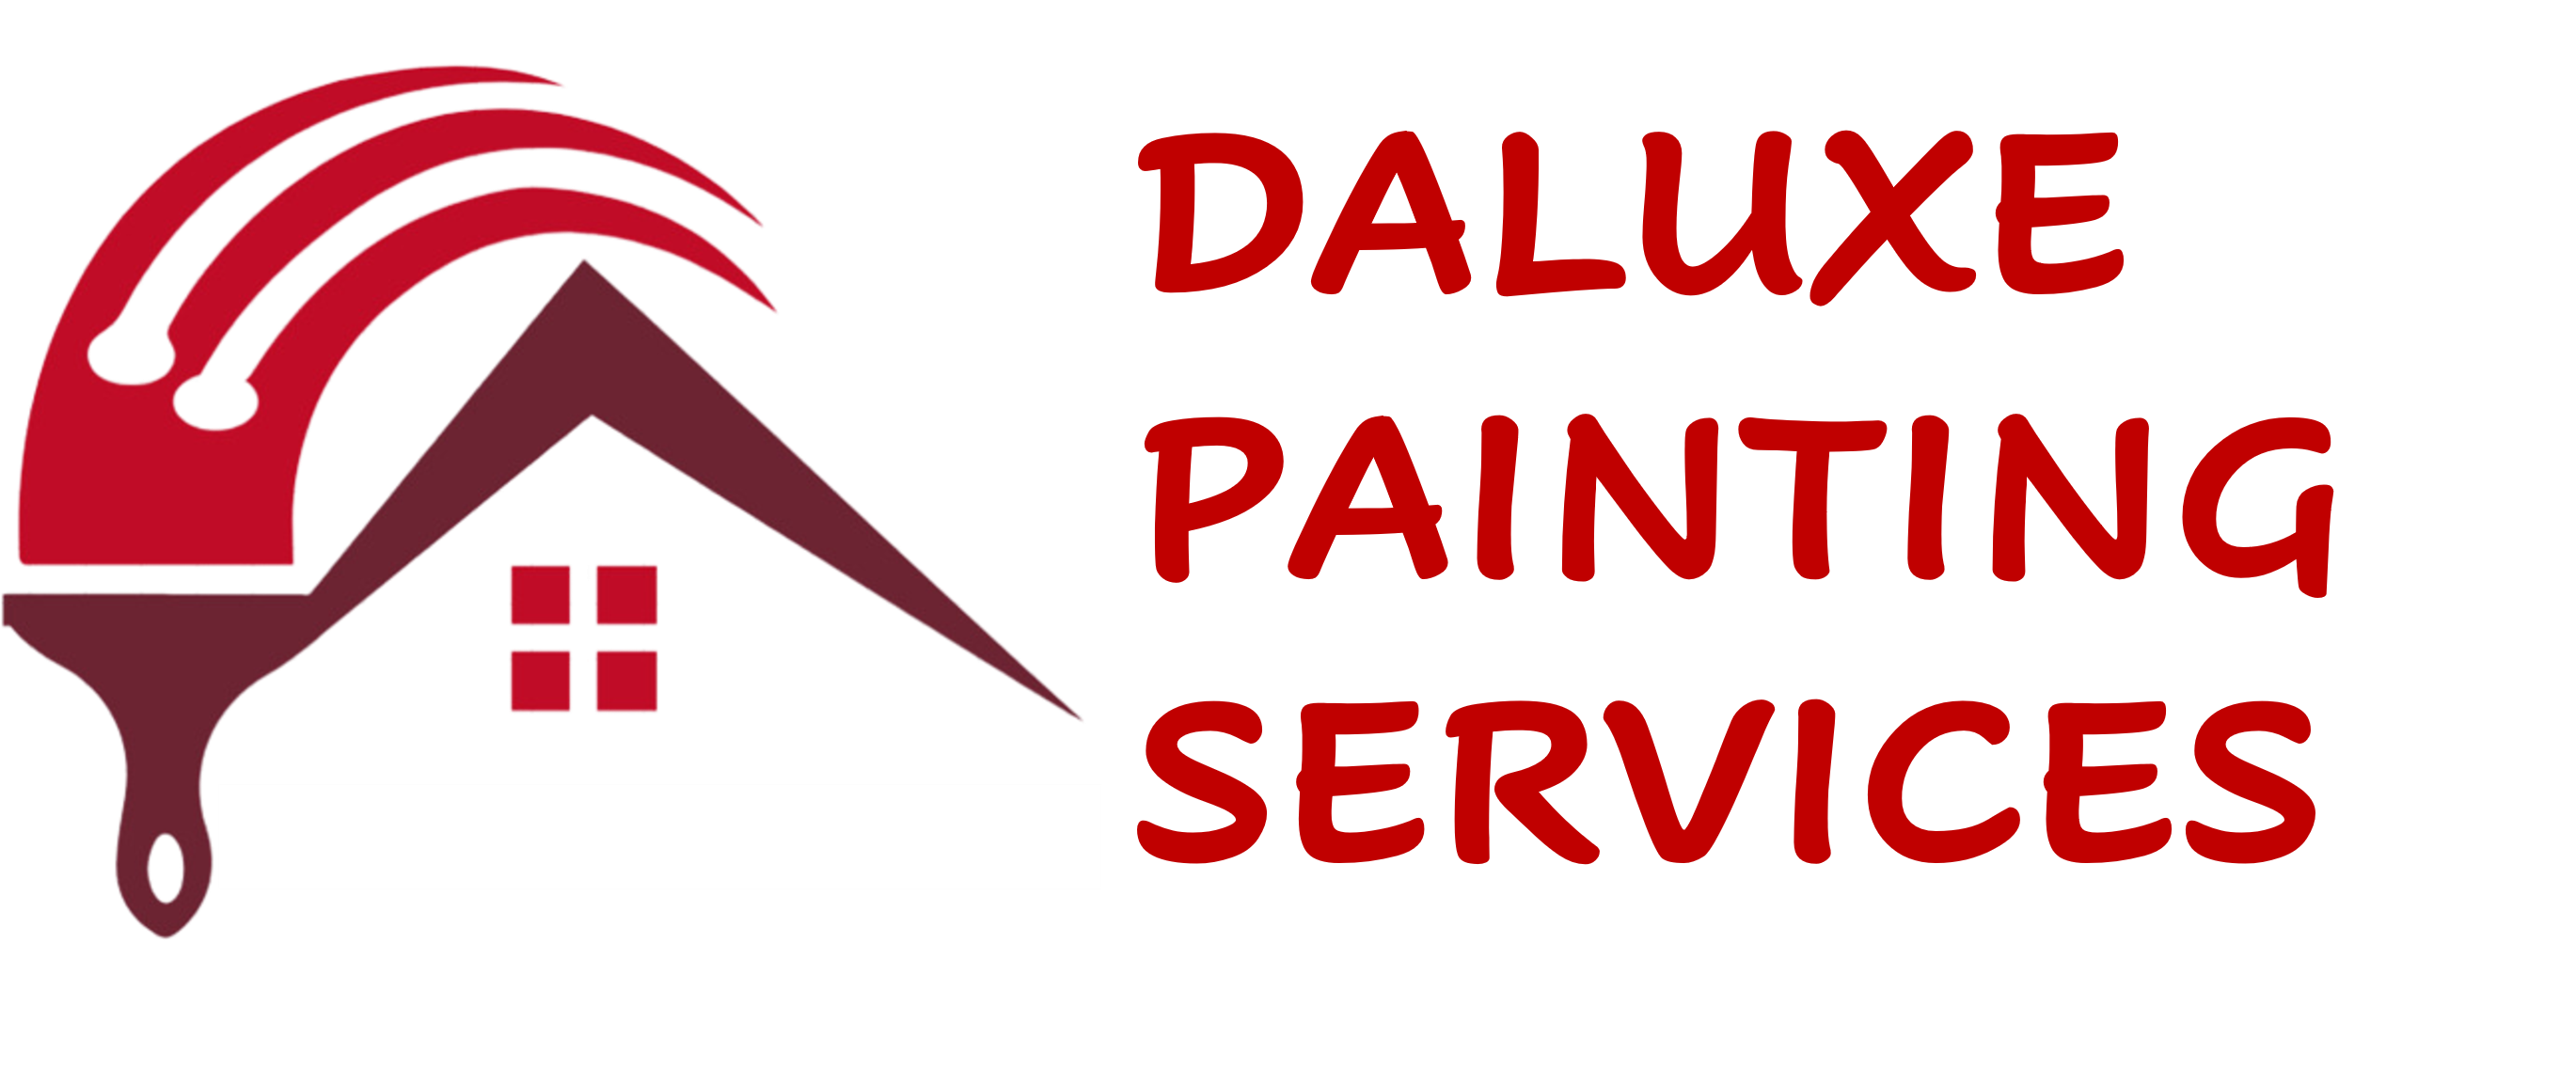 Daluxe Painting Services